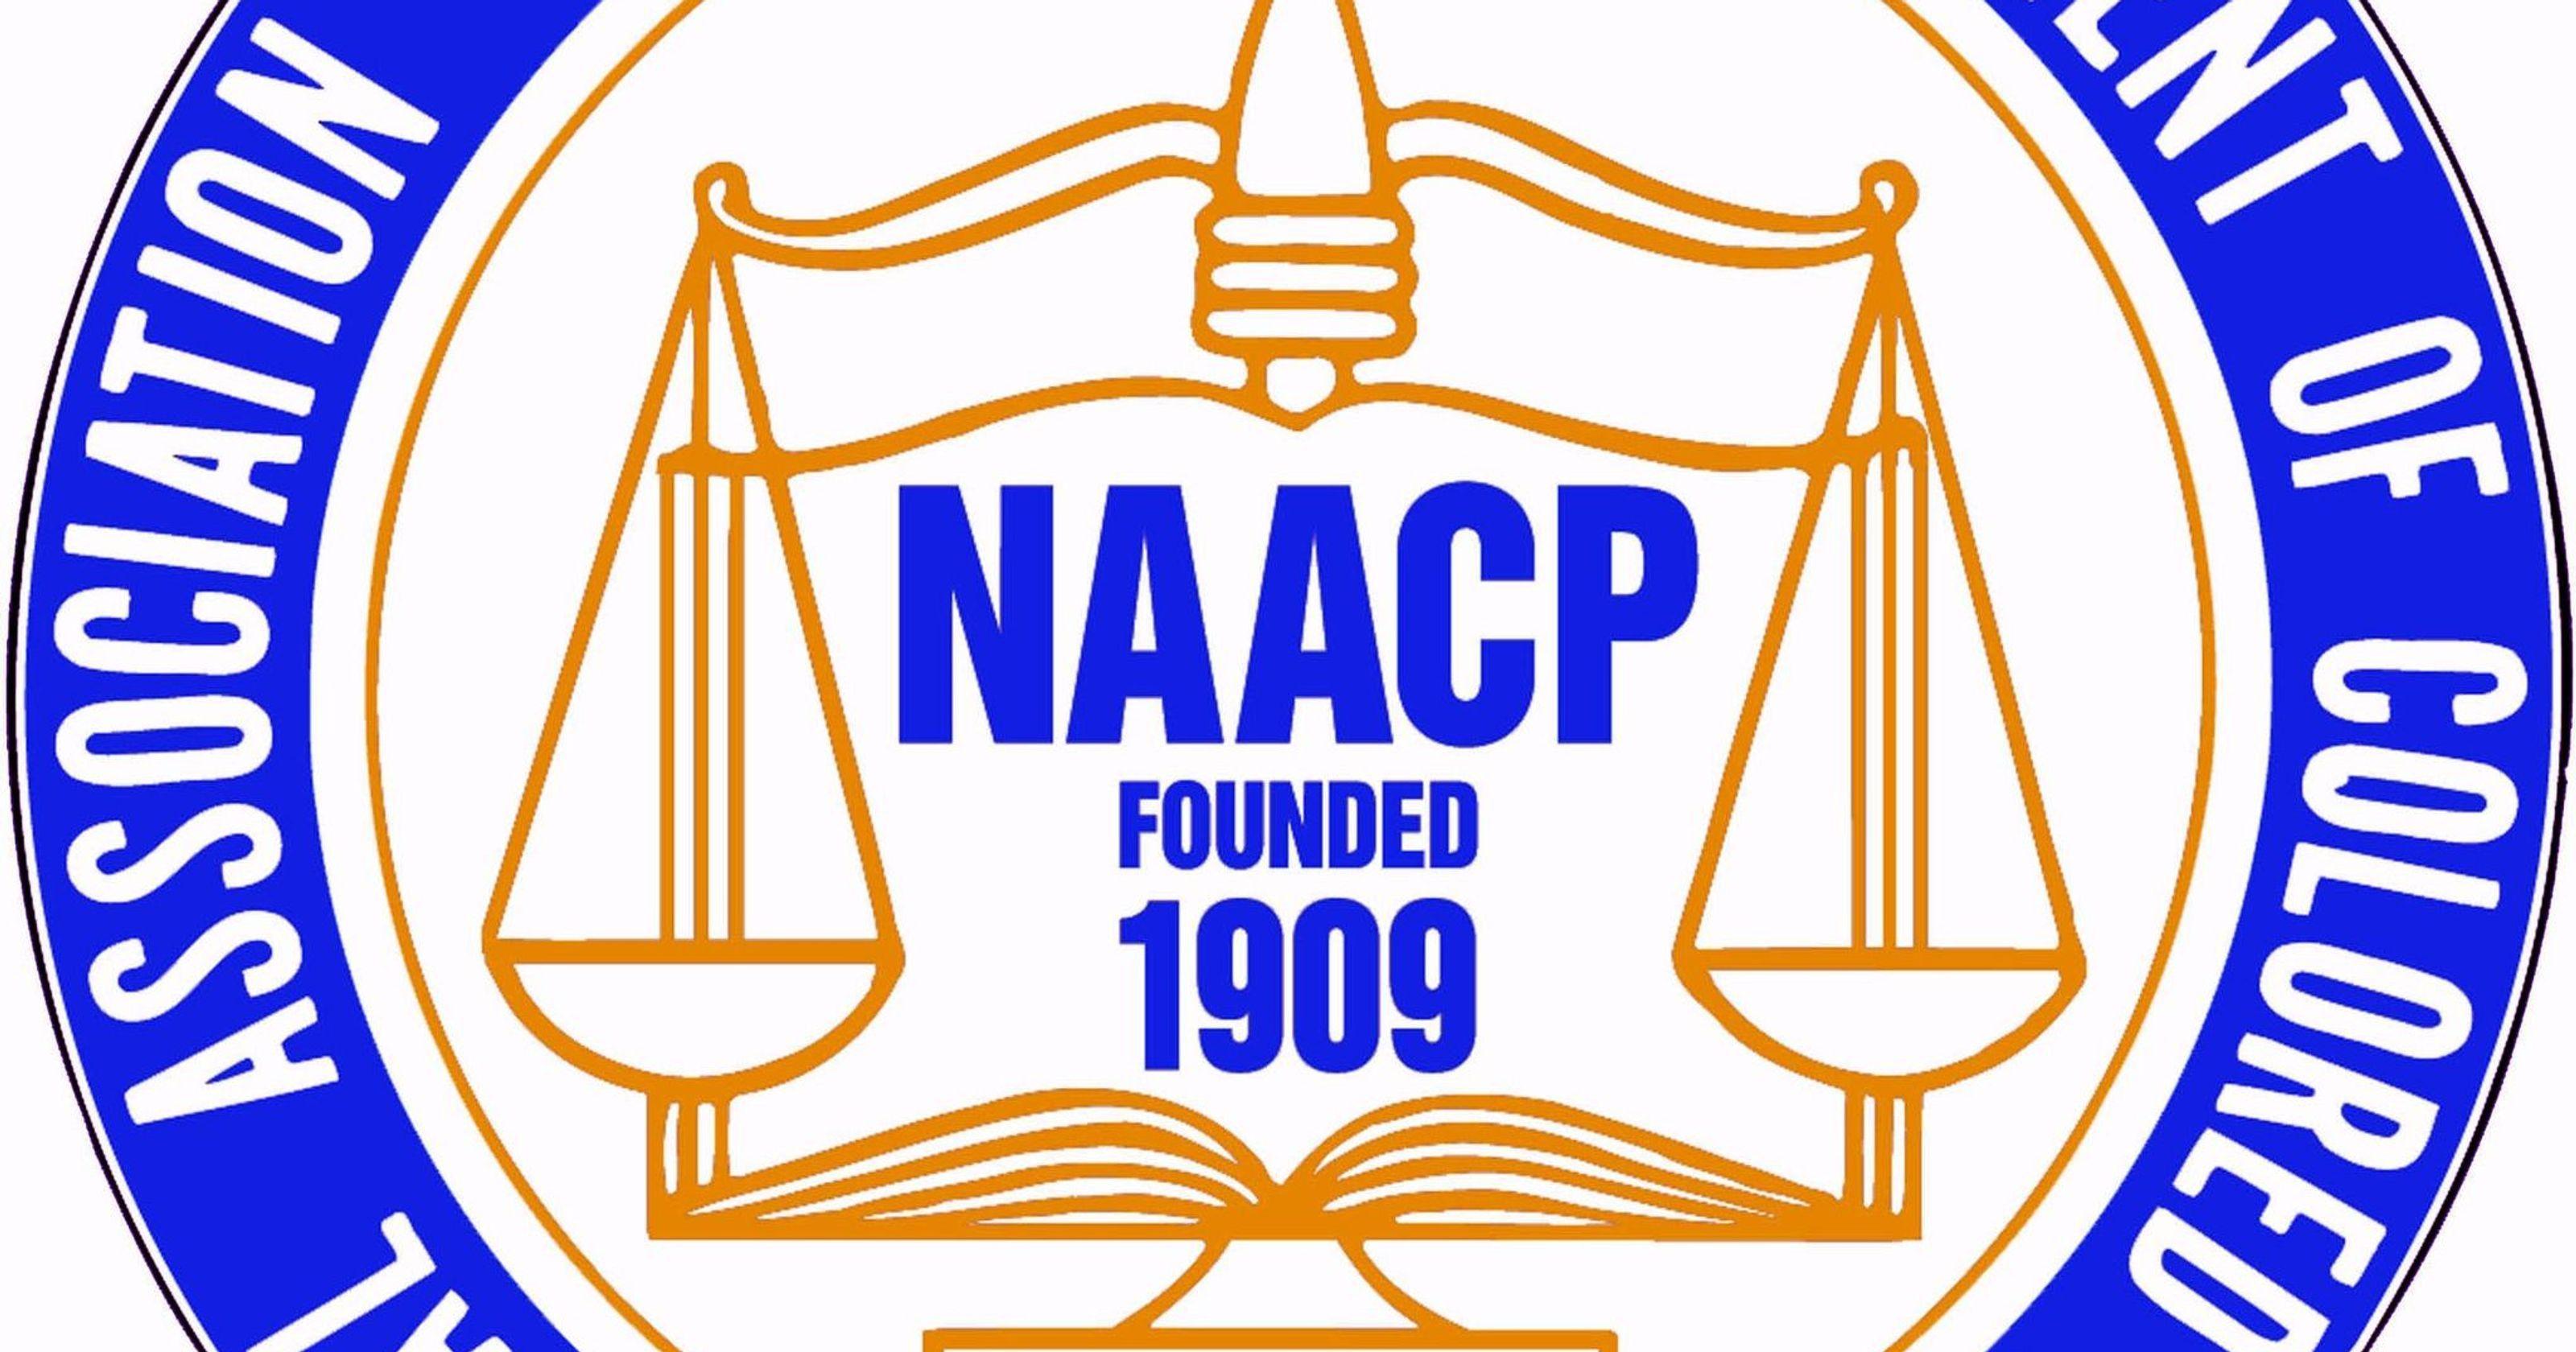 NAACP Logo - NAACP to honor diversity, connections at event Saturday